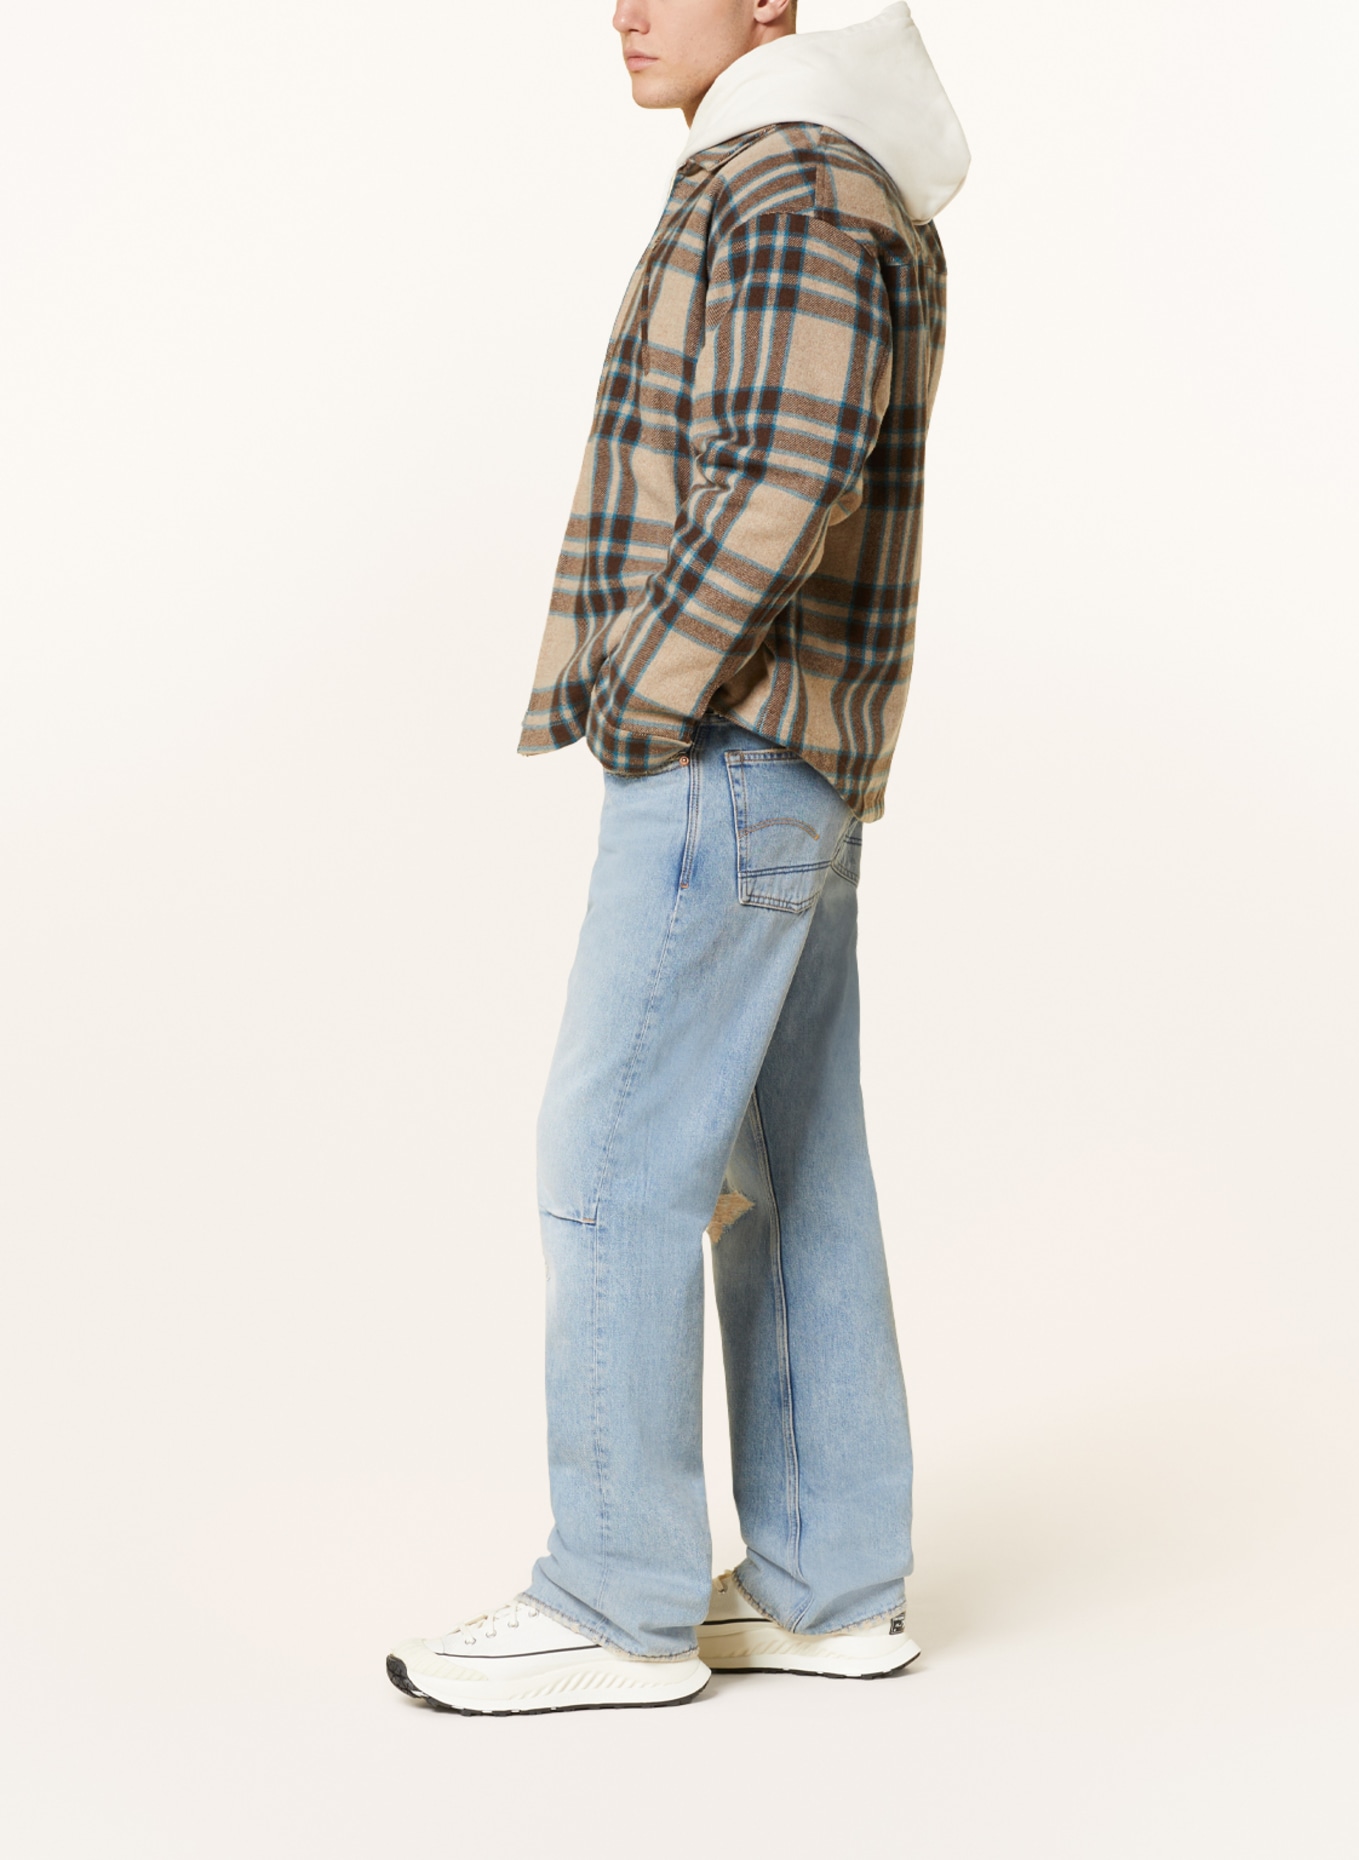 G-Star RAW Destroyed Jeans LENNEY BOOTCUT Regular Fit, Farbe: G672 sun faded ripped fogbow (Bild 4)